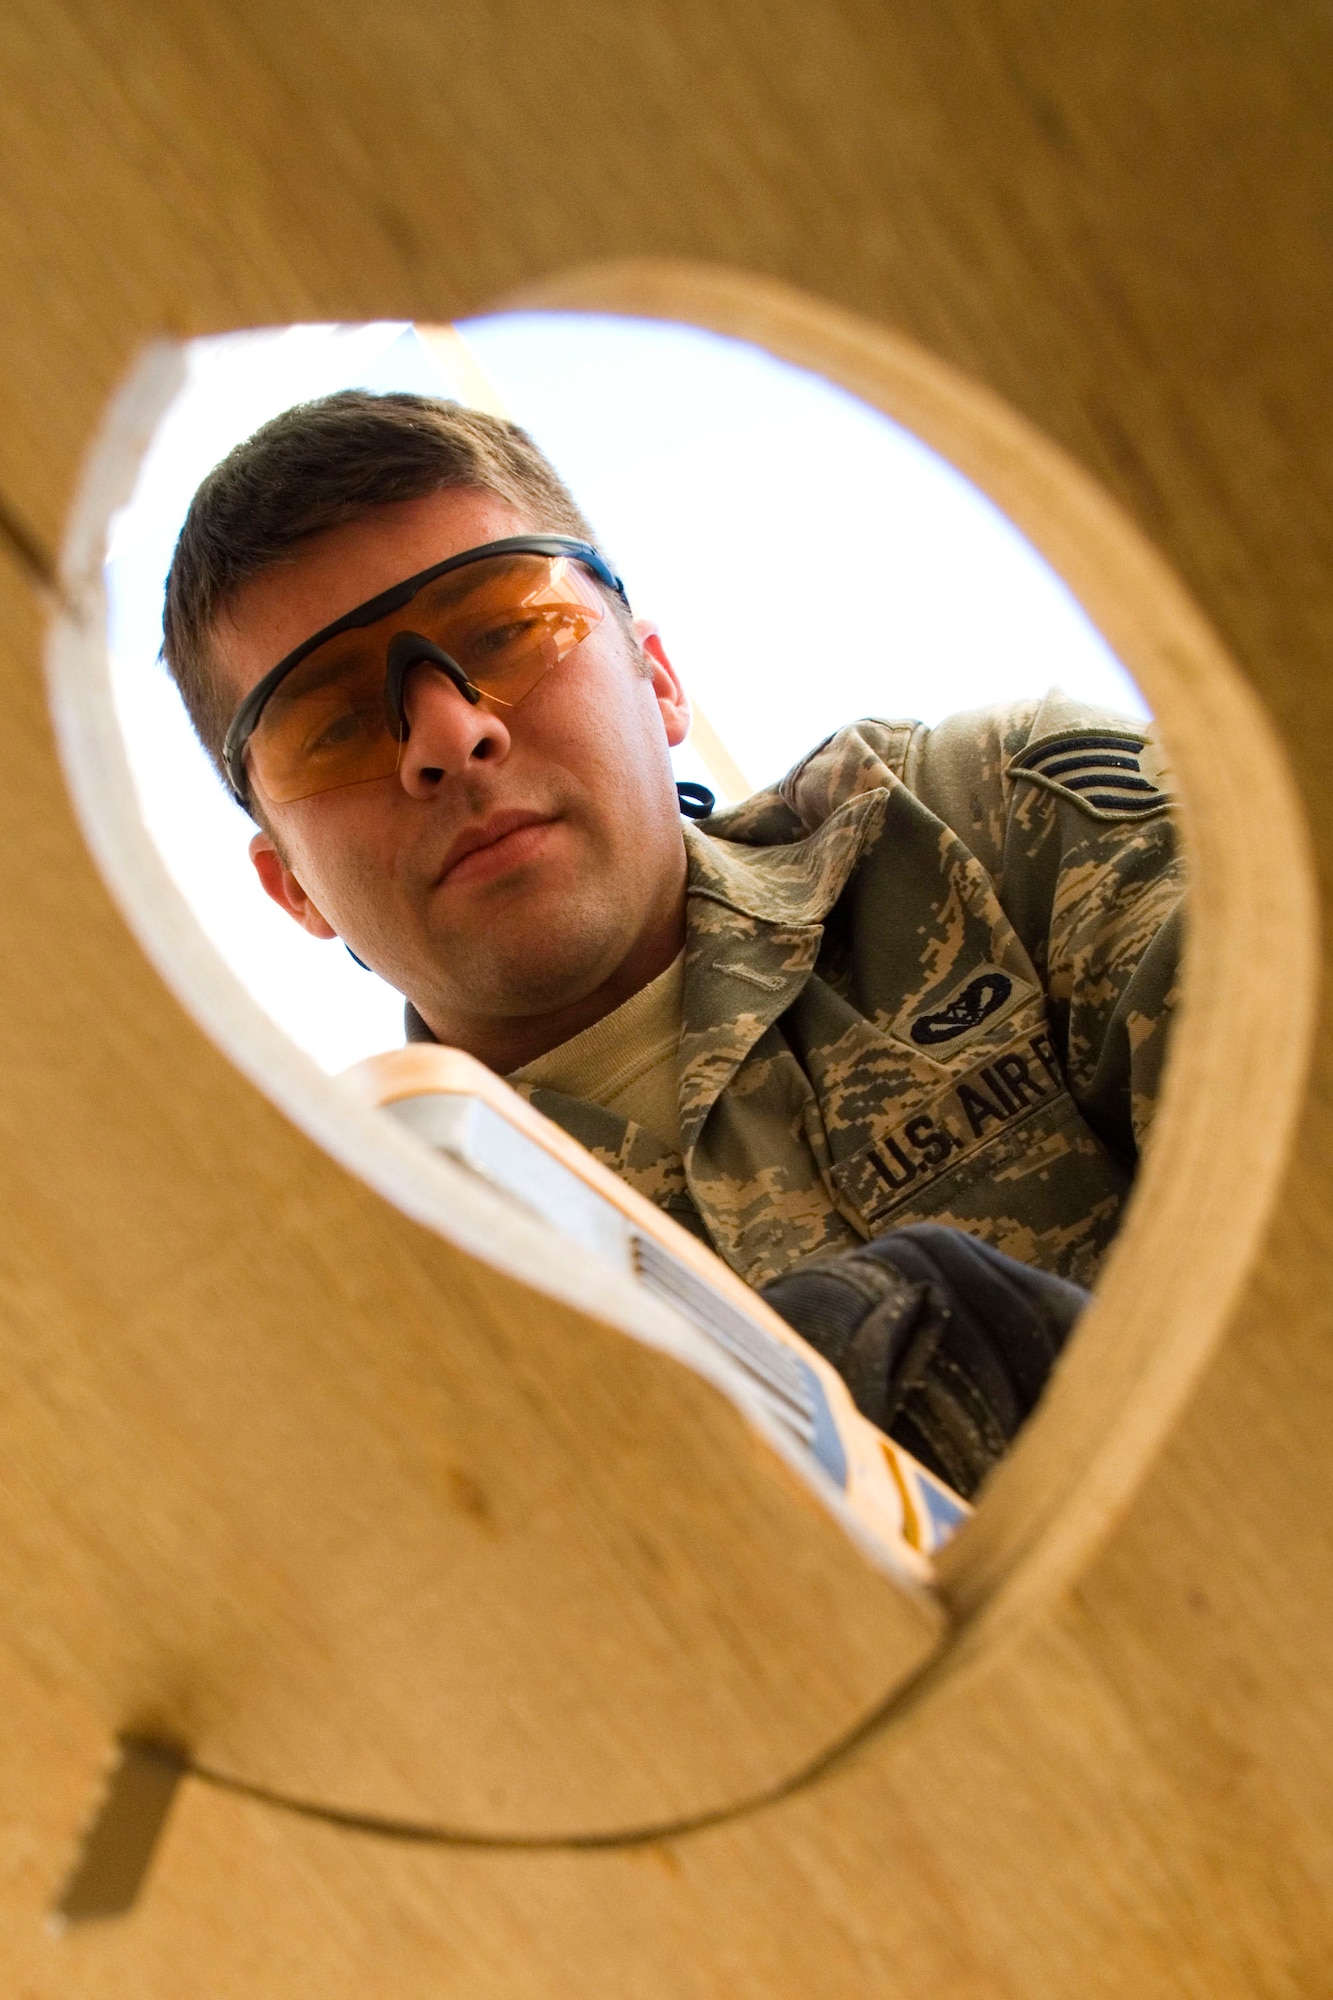 Staff Sgt. Caleb Dennis saws a drainage hole for a shower latrine unit Jan. 15 at Balad Air Base, Iraq. The unit is a prototype to be used at forward operating bases throughout Iraq. Sergeant Dennis, a 732nd Expeditionary Civil Engineer Squadron utility technician, is deployed from Kadena Air Base, Japan. (U.S. Air Force photo/Staff Sgt. Joshua Garcia)